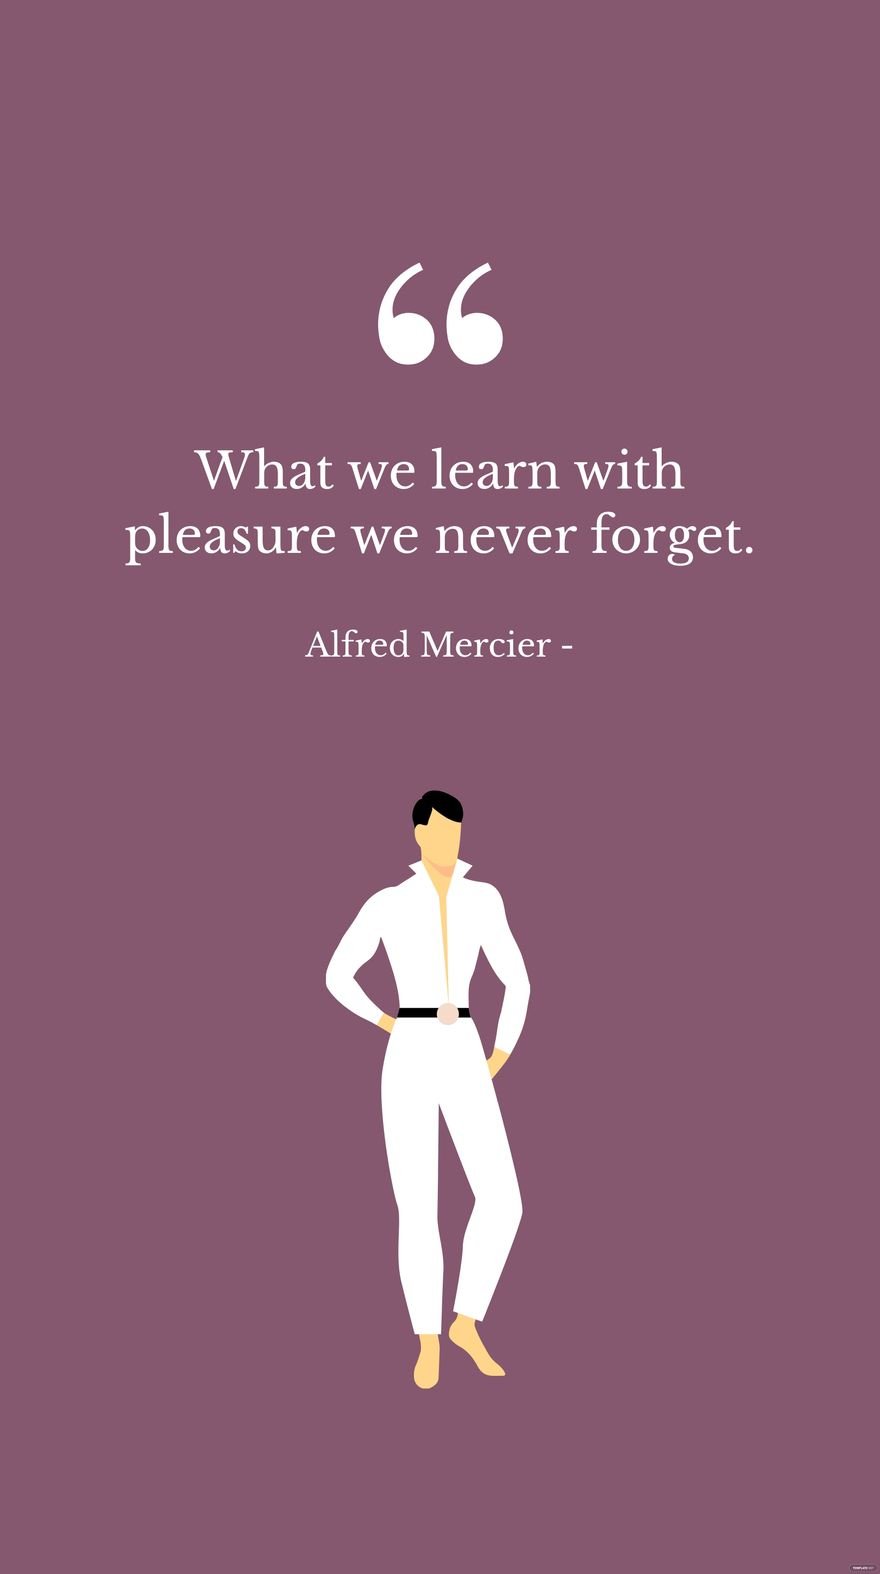 Alfred Mercier - What we learn with pleasure we never forget. in JPG